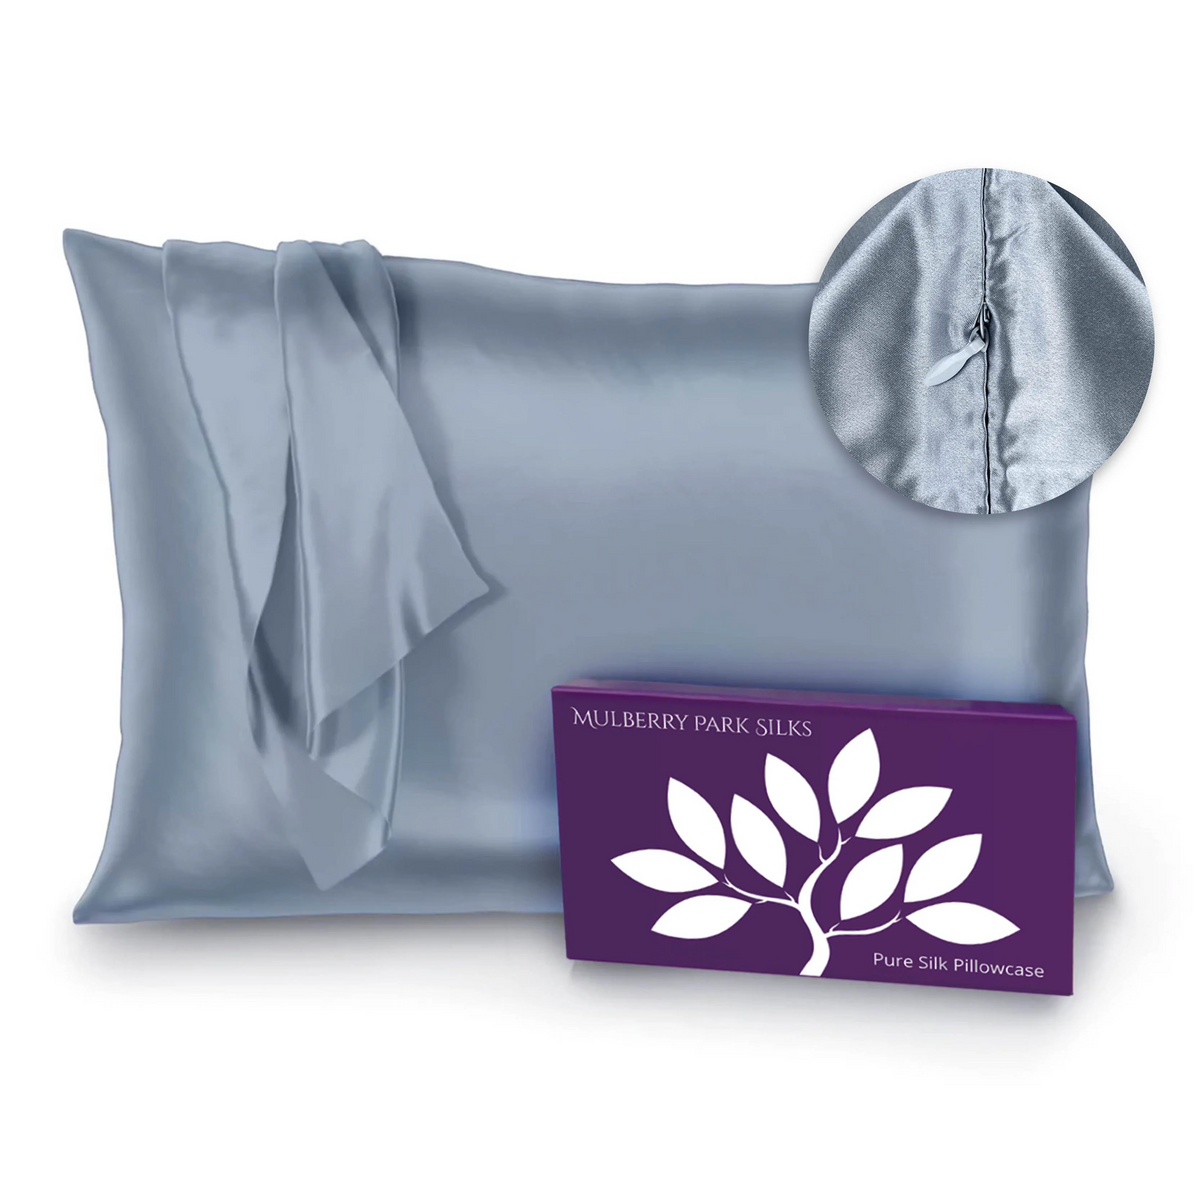 Steel Blue Silo Image of Mulberry Park Silks Deluxe 22 Momme Pure Silk Pillowcase with Zipper Detail and Box